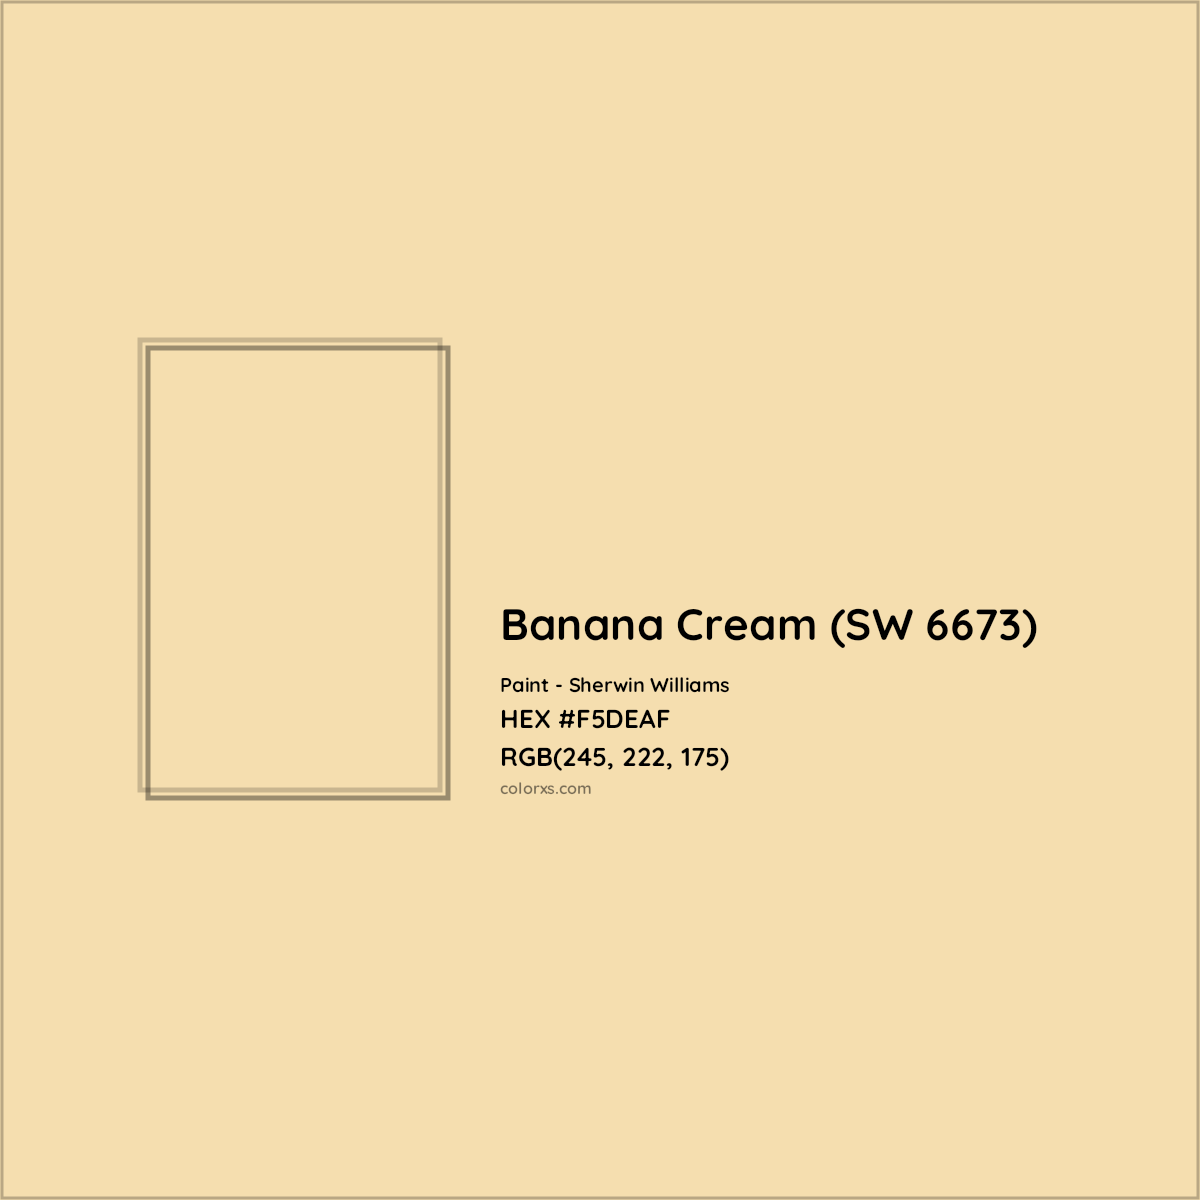 HEX #F5DEAF Banana Cream (SW 6673) Paint Sherwin Williams - Color Code